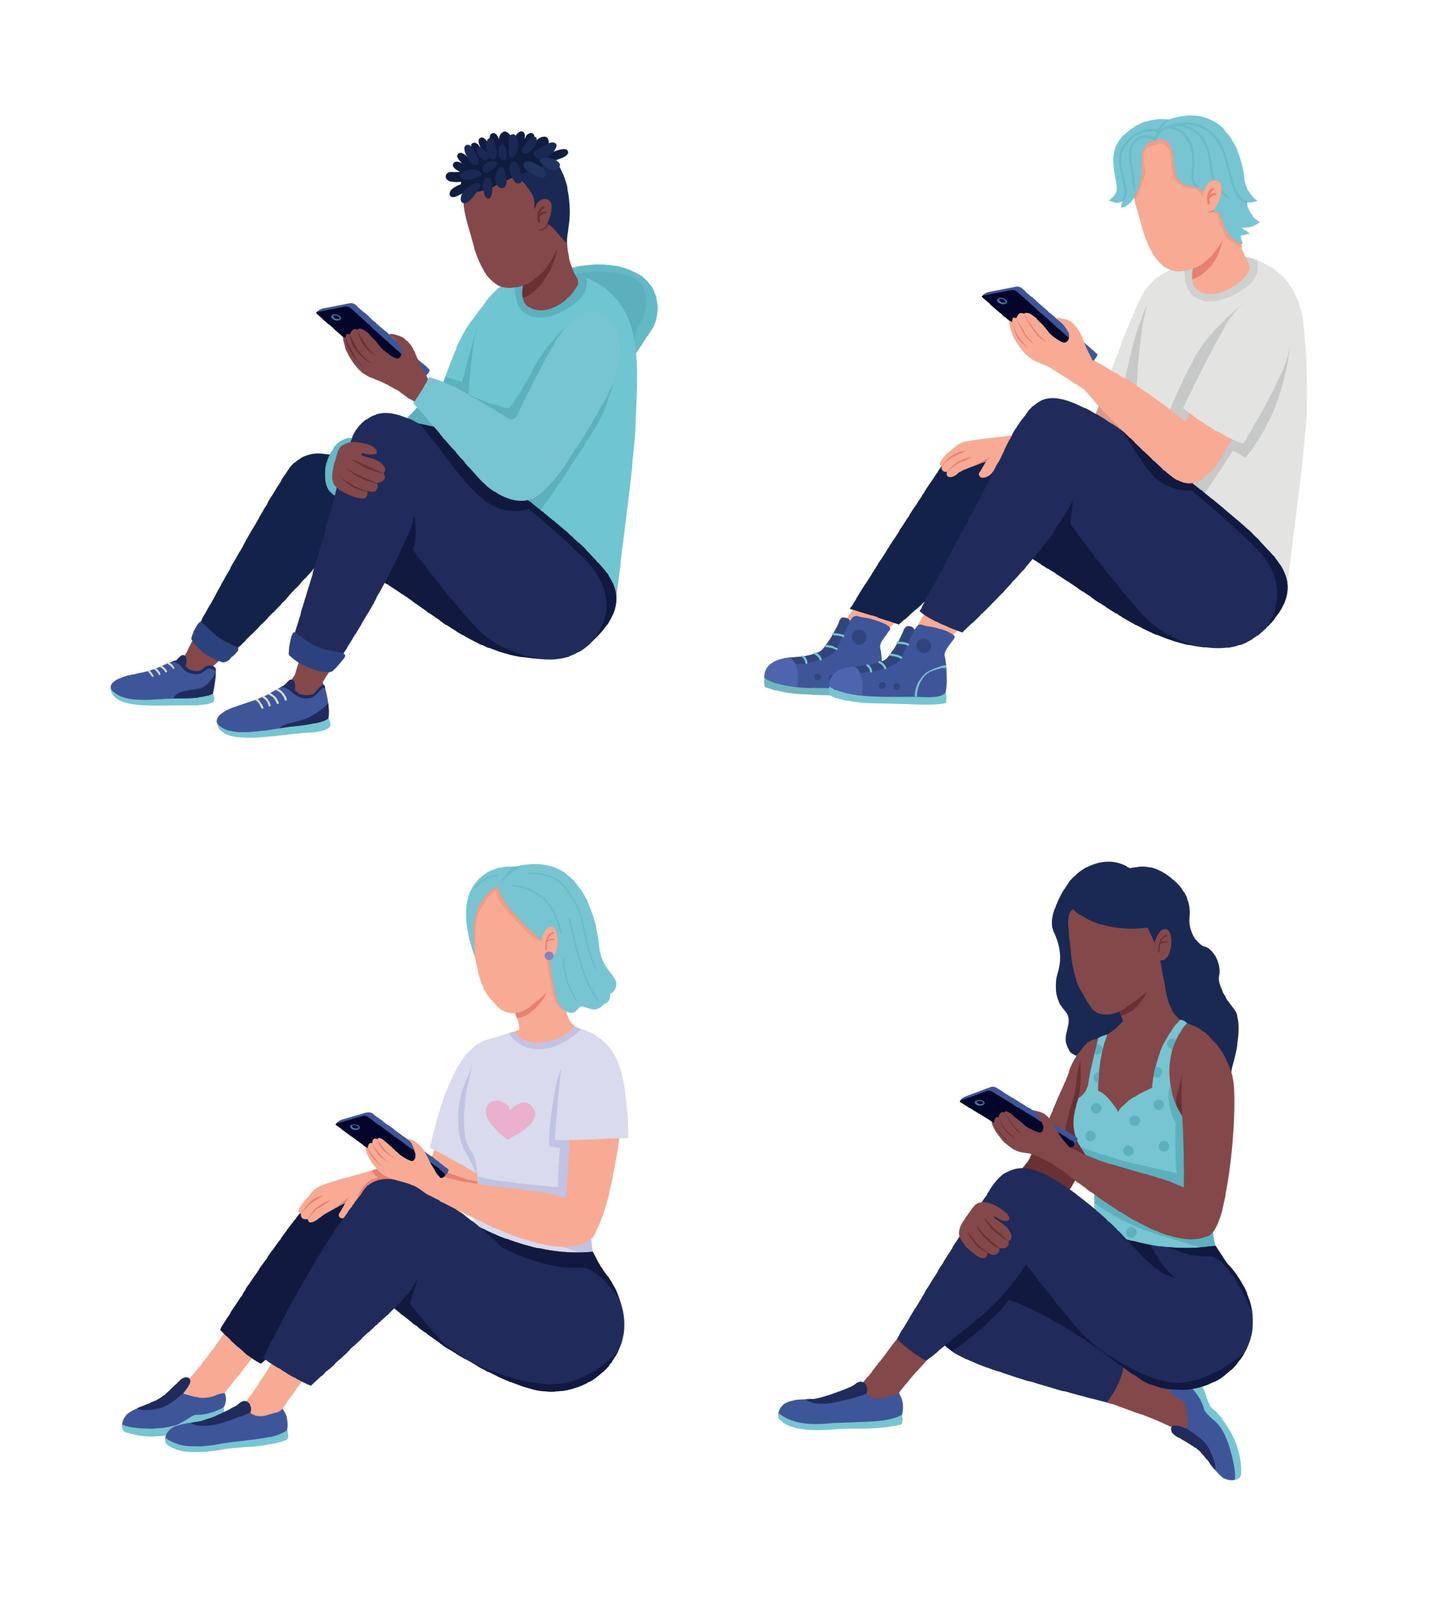 Teen smartphone addiction semi flat color vector characters set. Full body people on white. Spending time alone isolated modern cartoon style illustrations collection for graphic design and animation